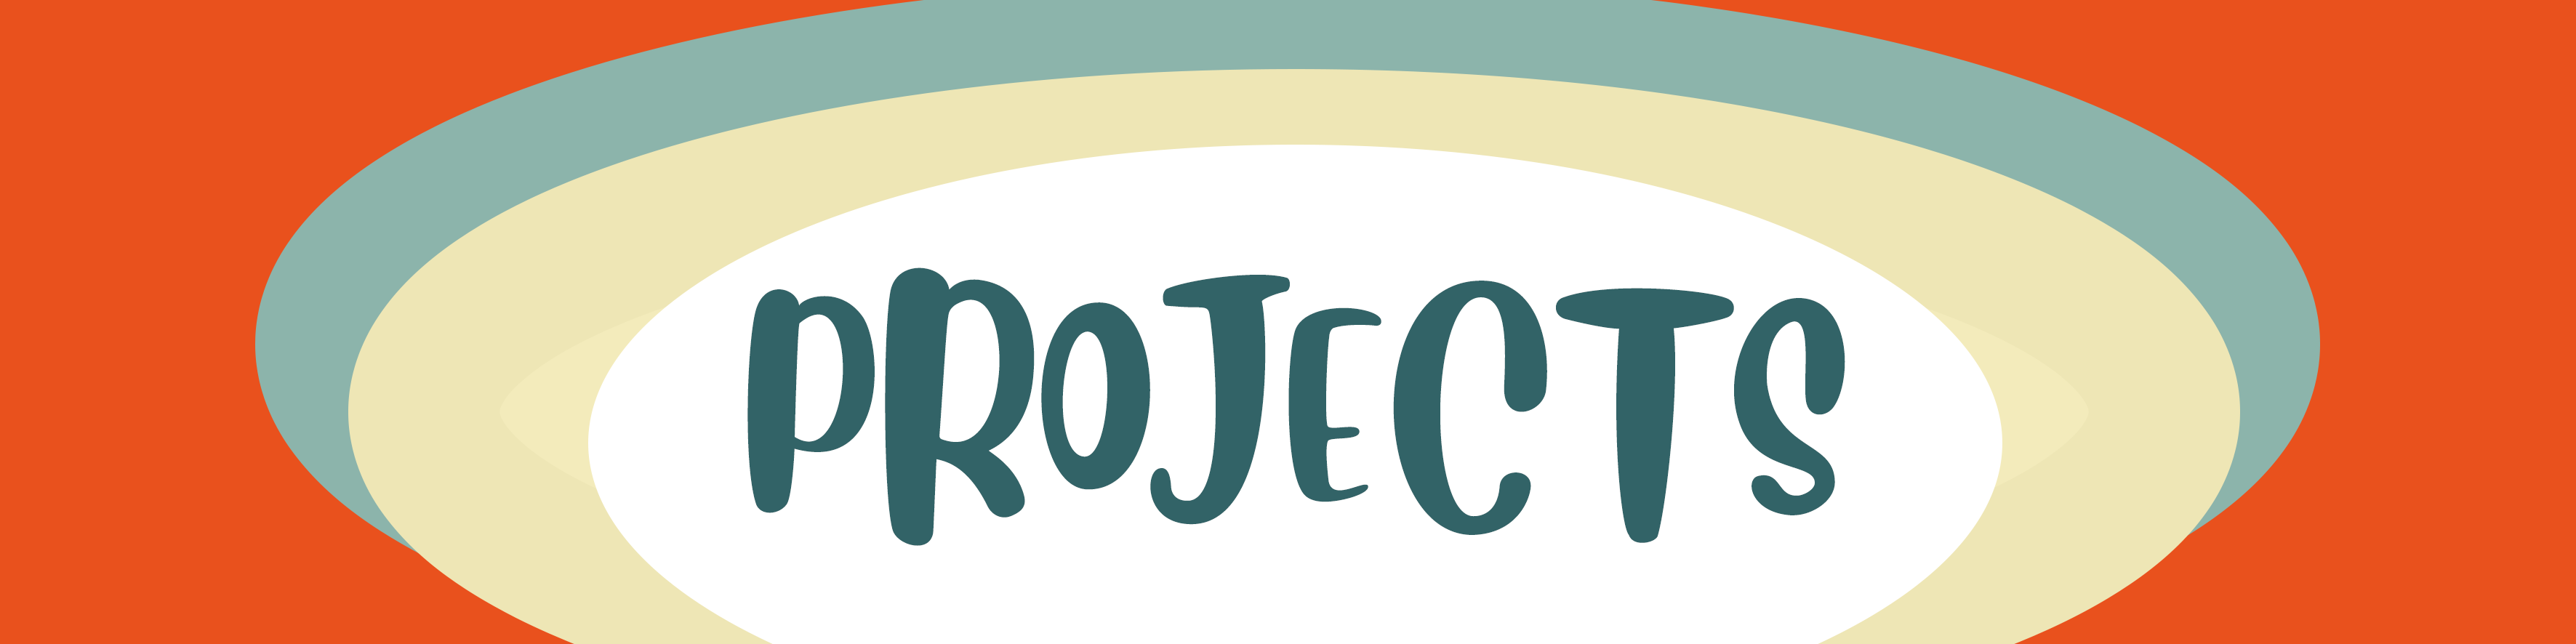 projects_header.png